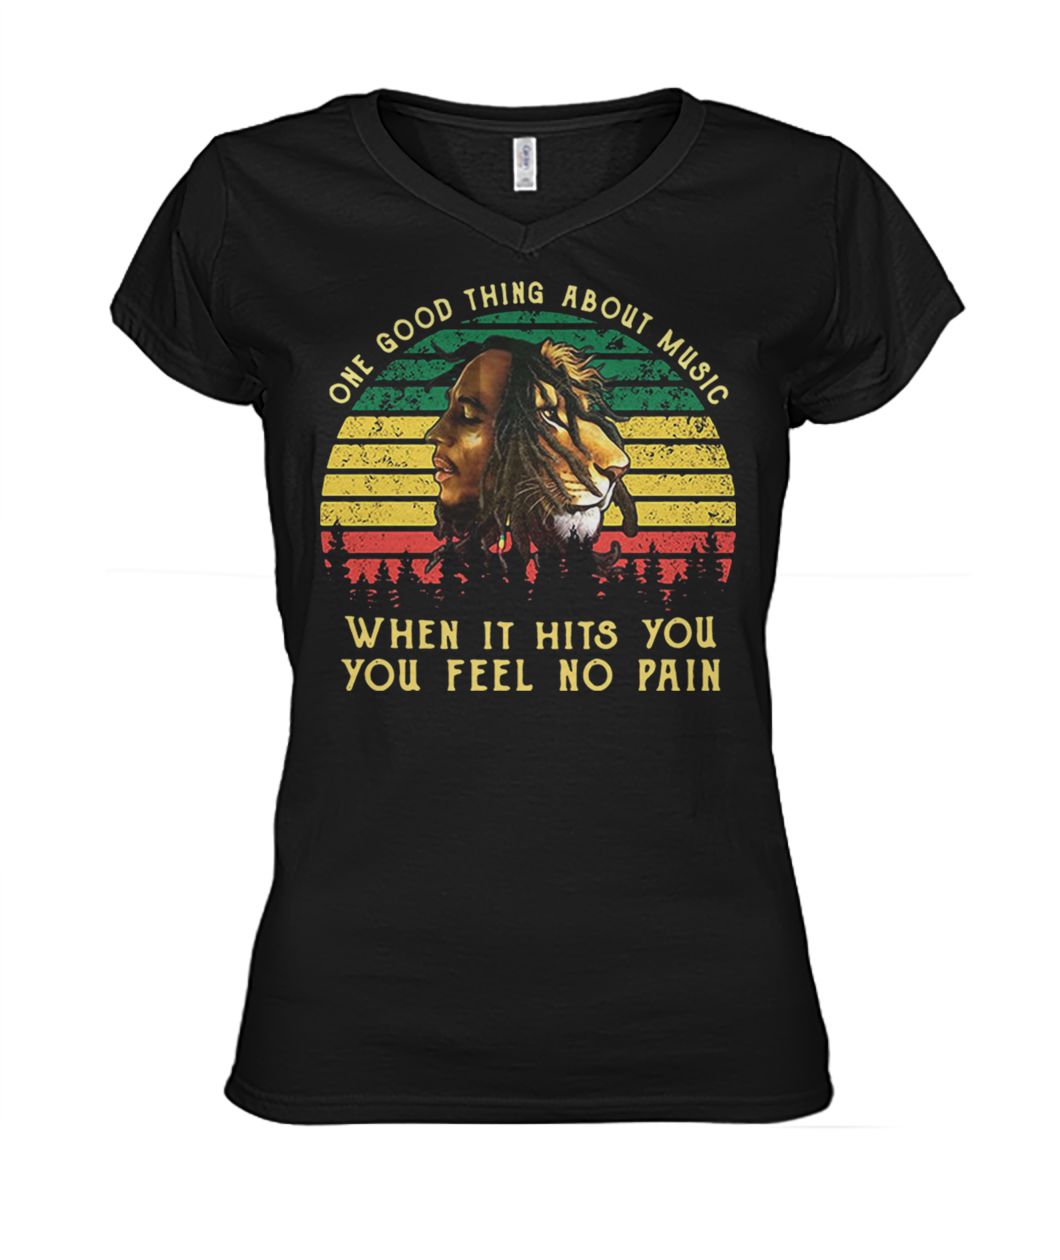 Vintage bob marley iron lion zion one good thing about music when it hits you you feel no pain women's v-neck